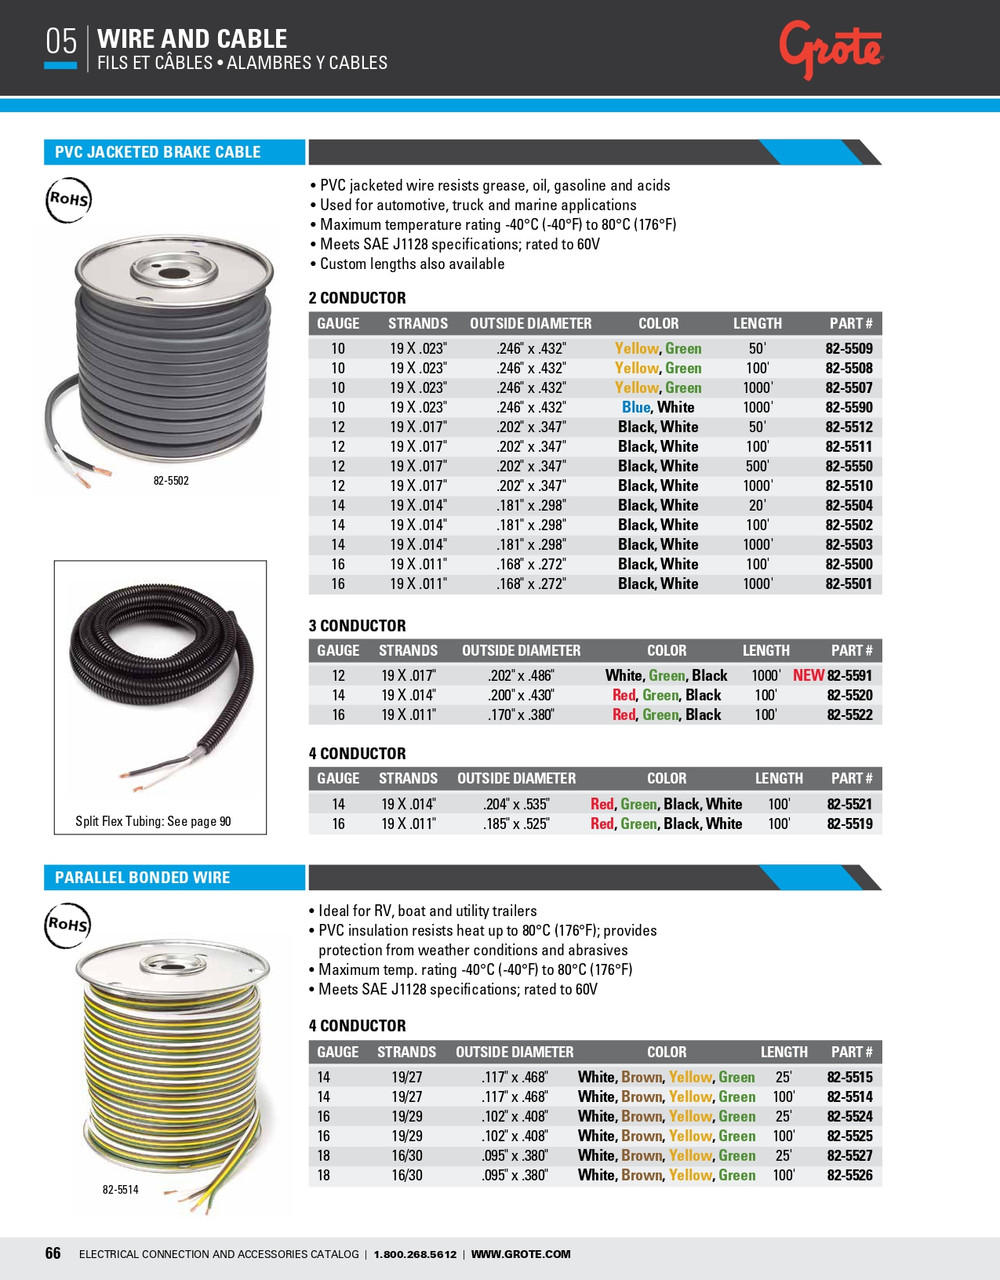 18/4 AWG Parallel Bonded Wire @ 25' - Brown/Green/White/Yellow  82-5527